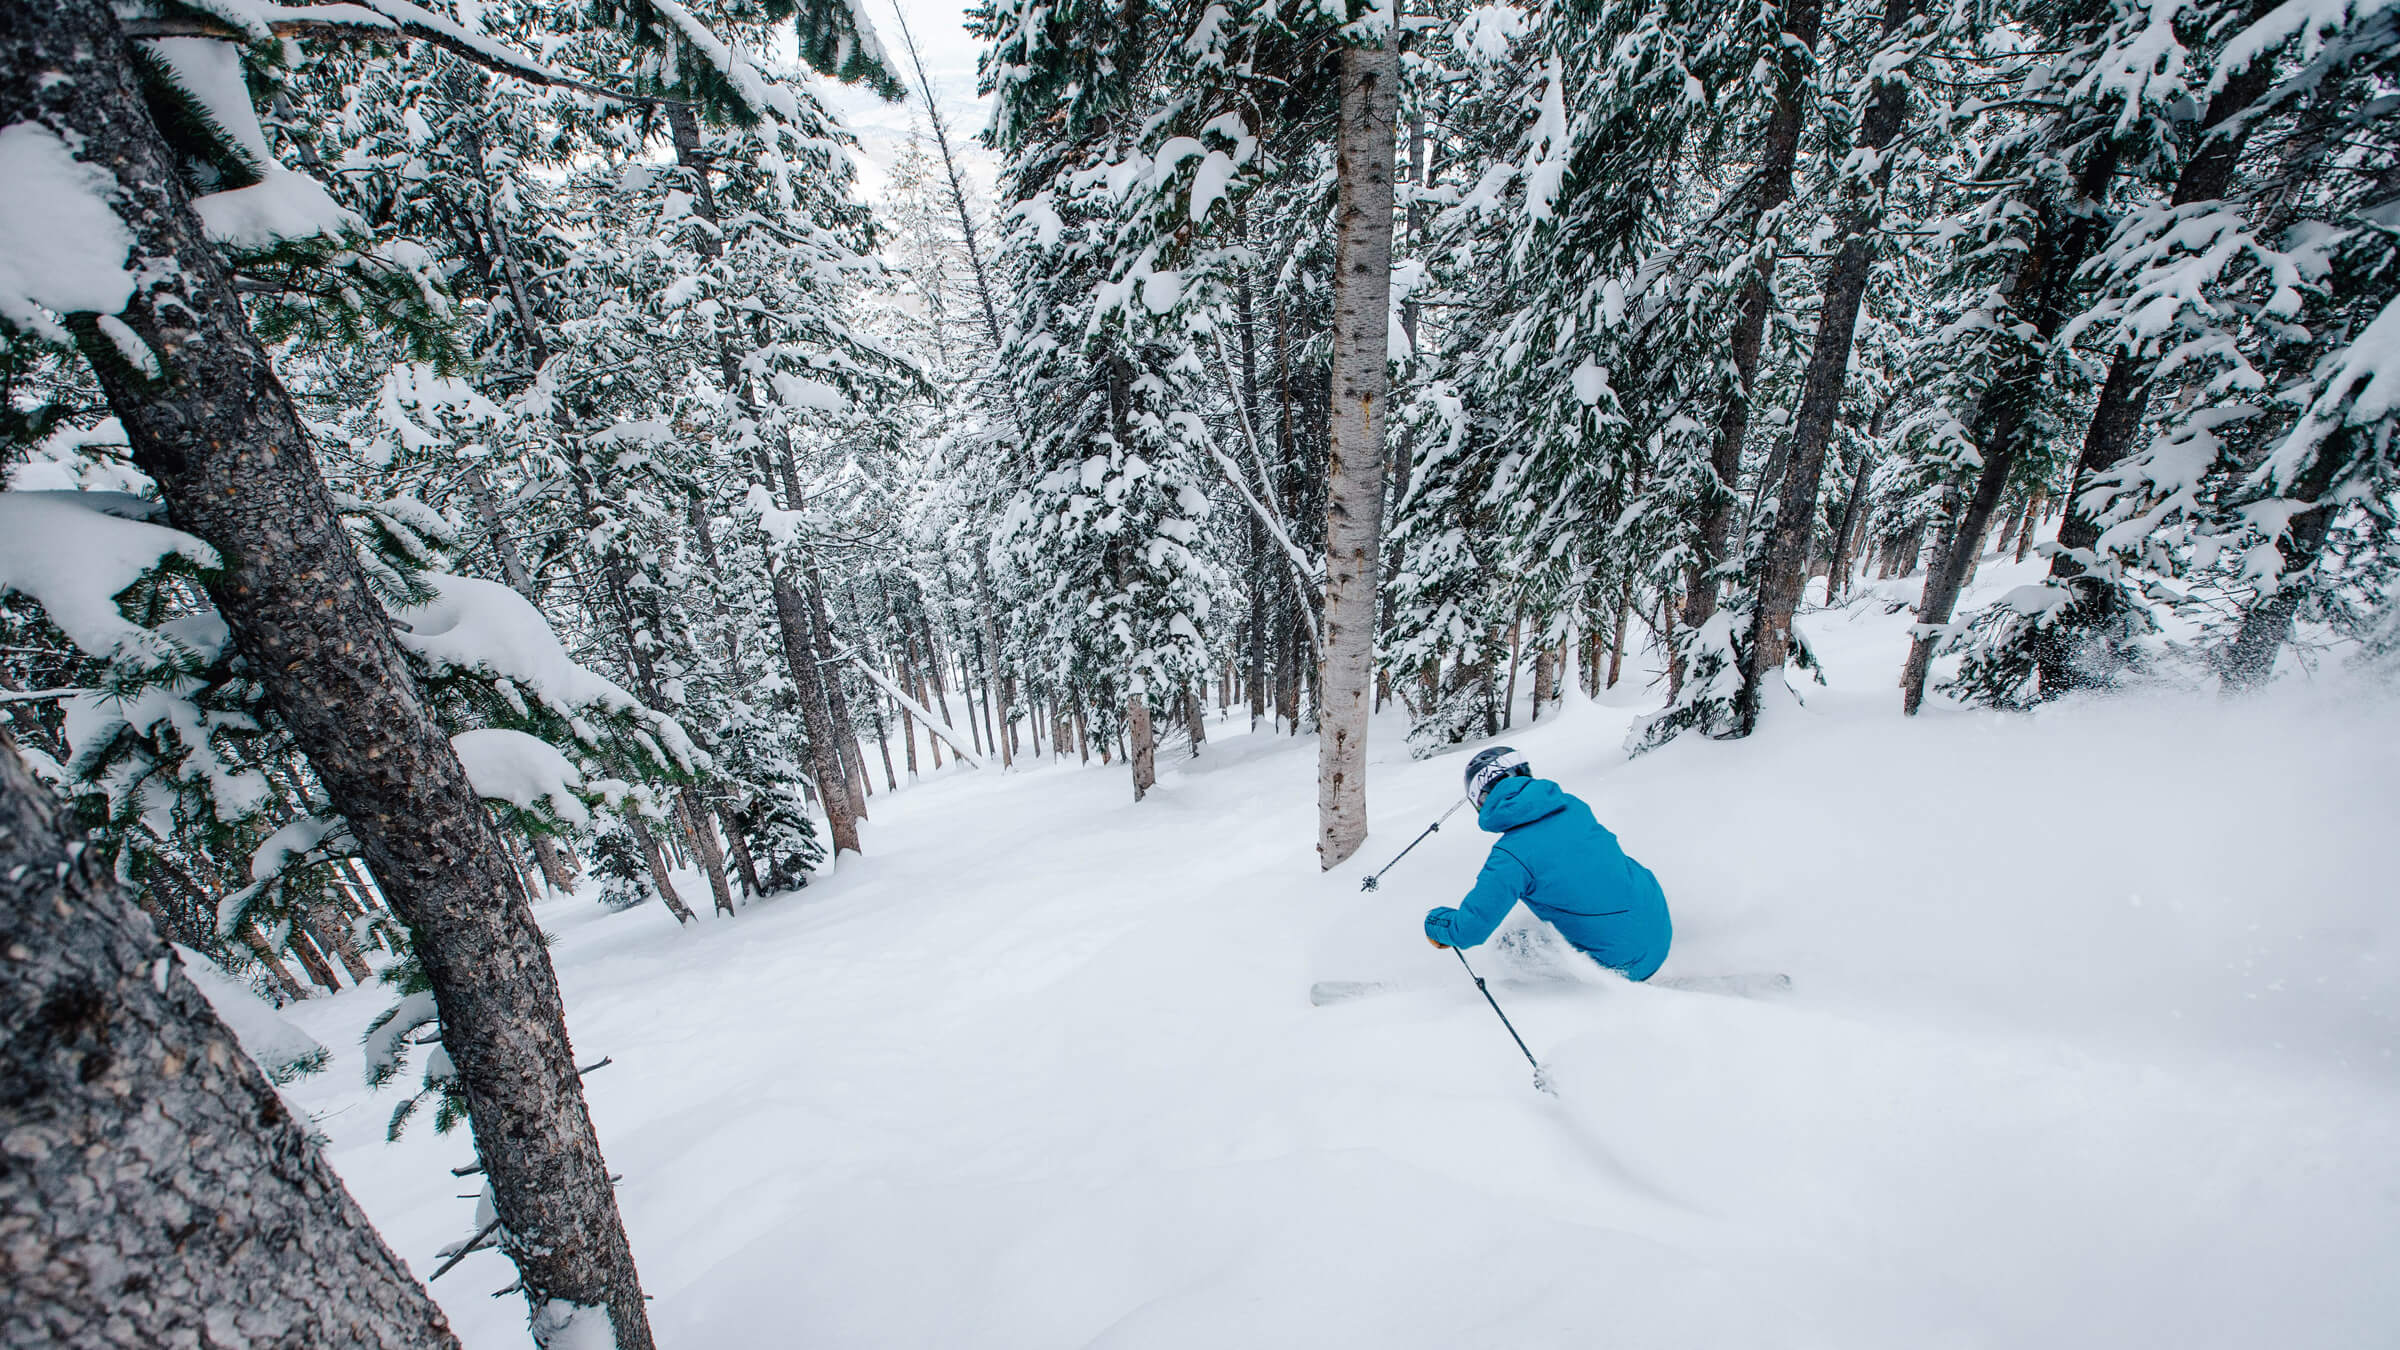 Skier going through deep powder in the trees.